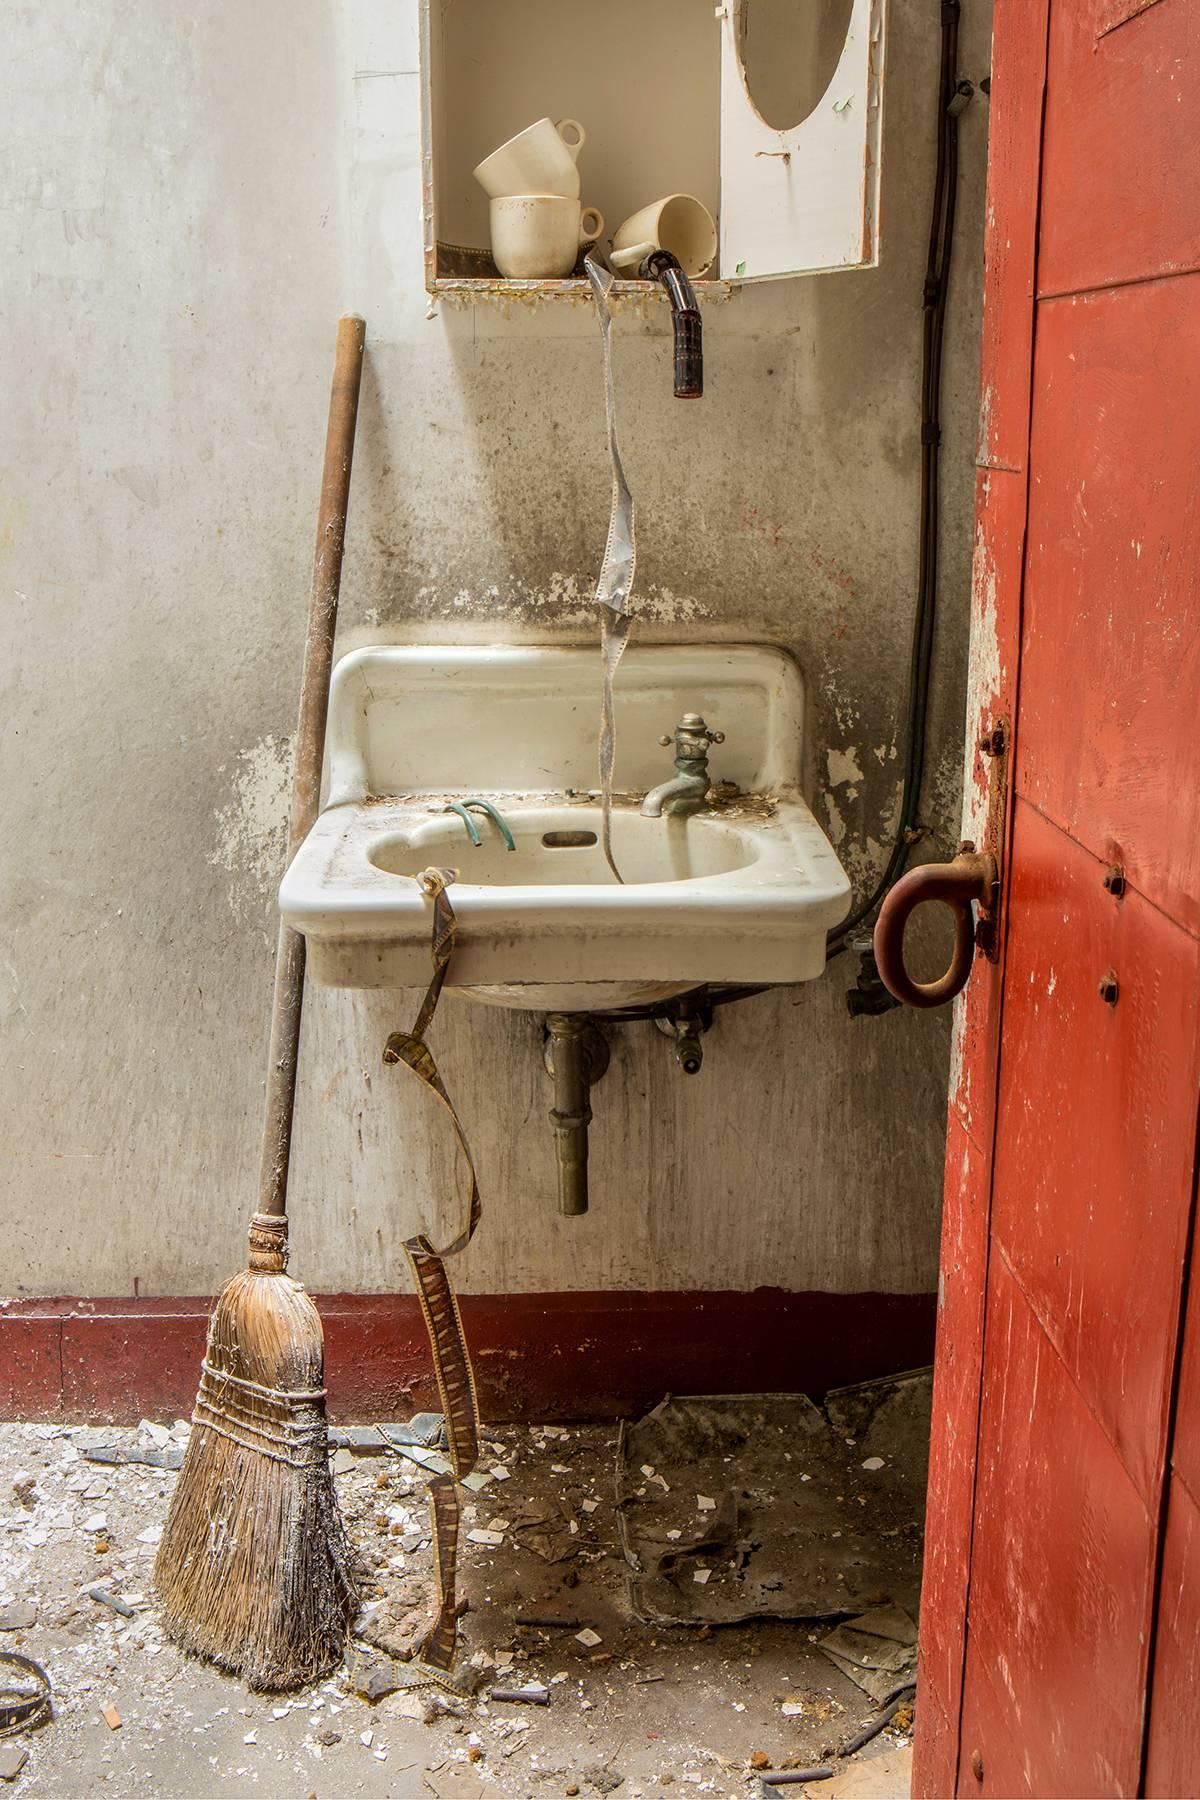 Rebecca Skinner Color Photograph - "Dirty Film", abandoned, theater, sink, broom, red, film, color photograph